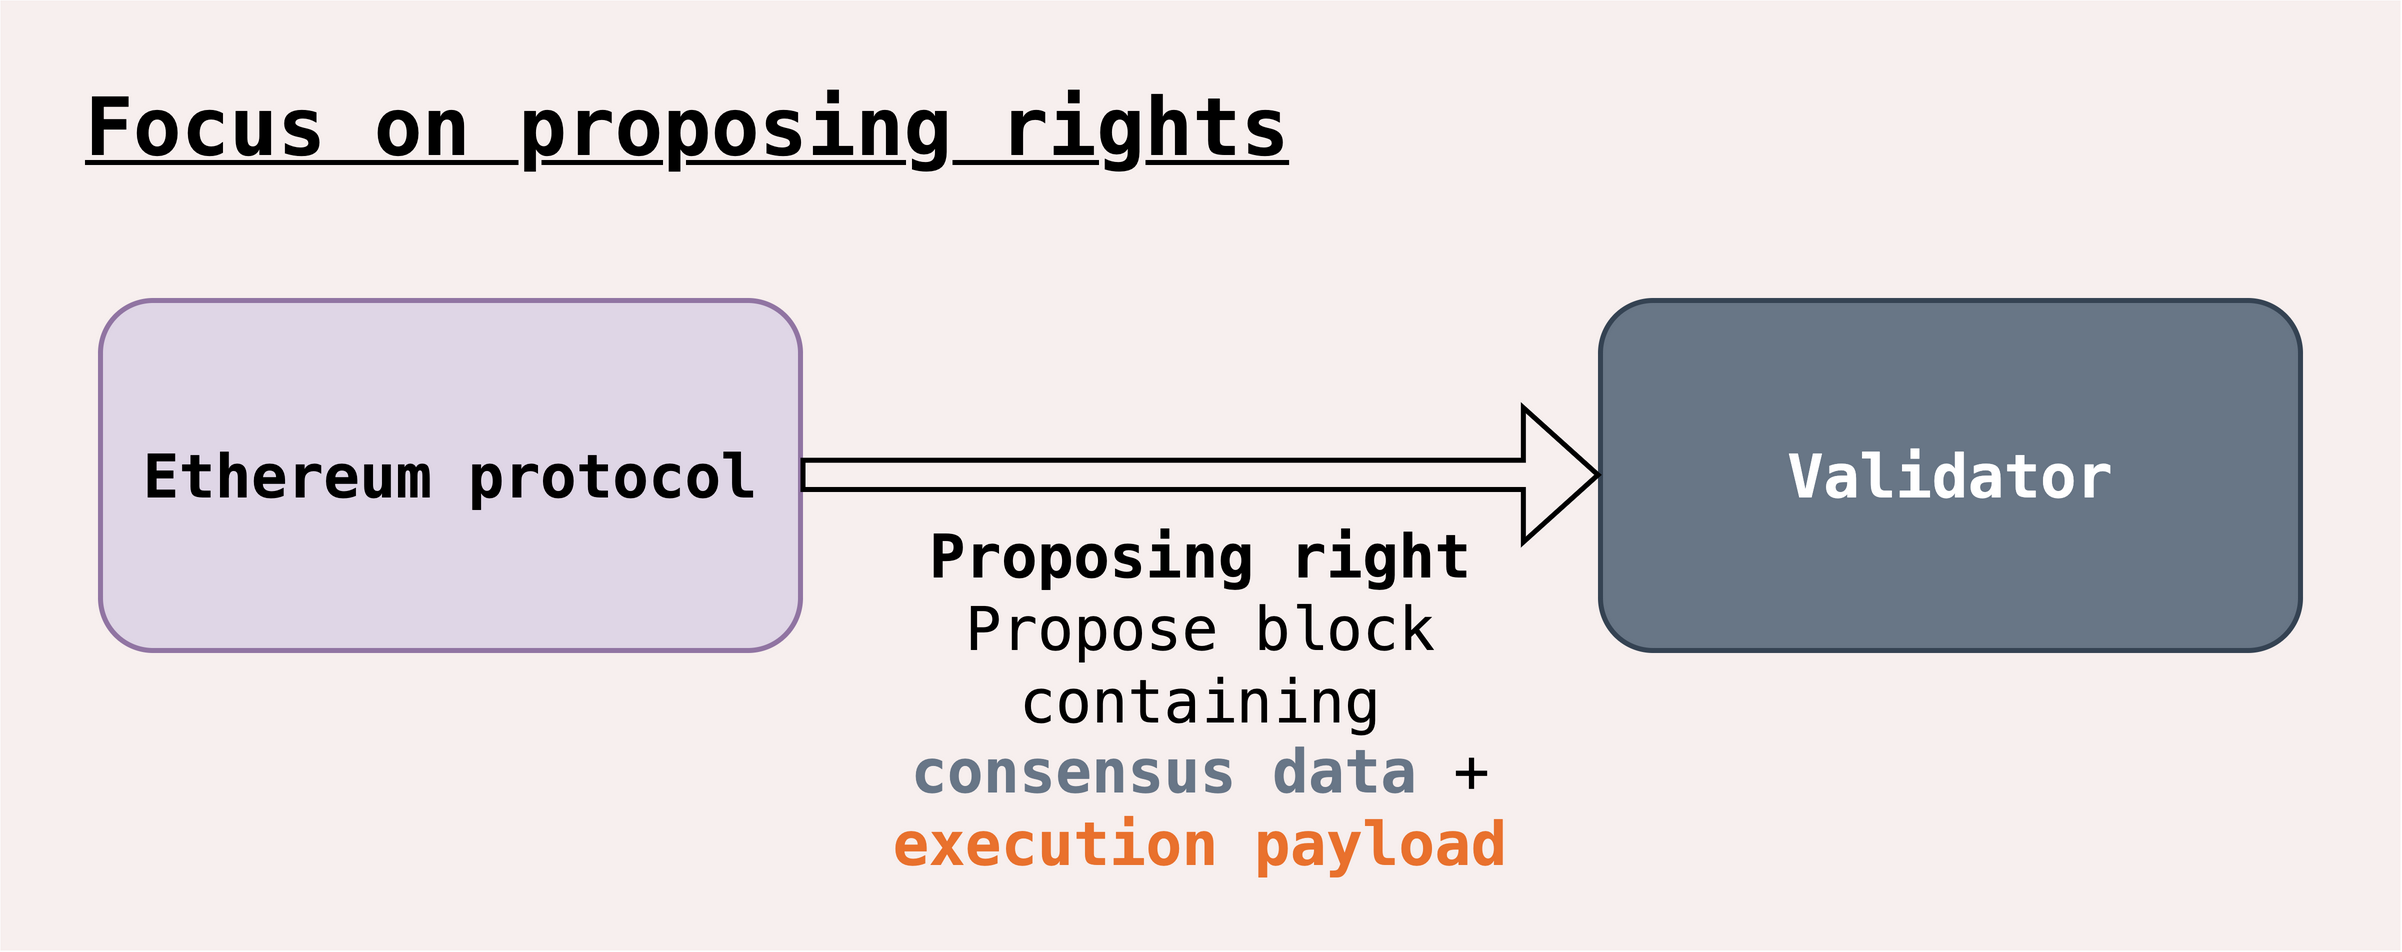 Thicc arrow indicates that proposing rights cover two distinct rights: The right to propose the consensus data block ("beacon block") and the right to propose the execution payload.